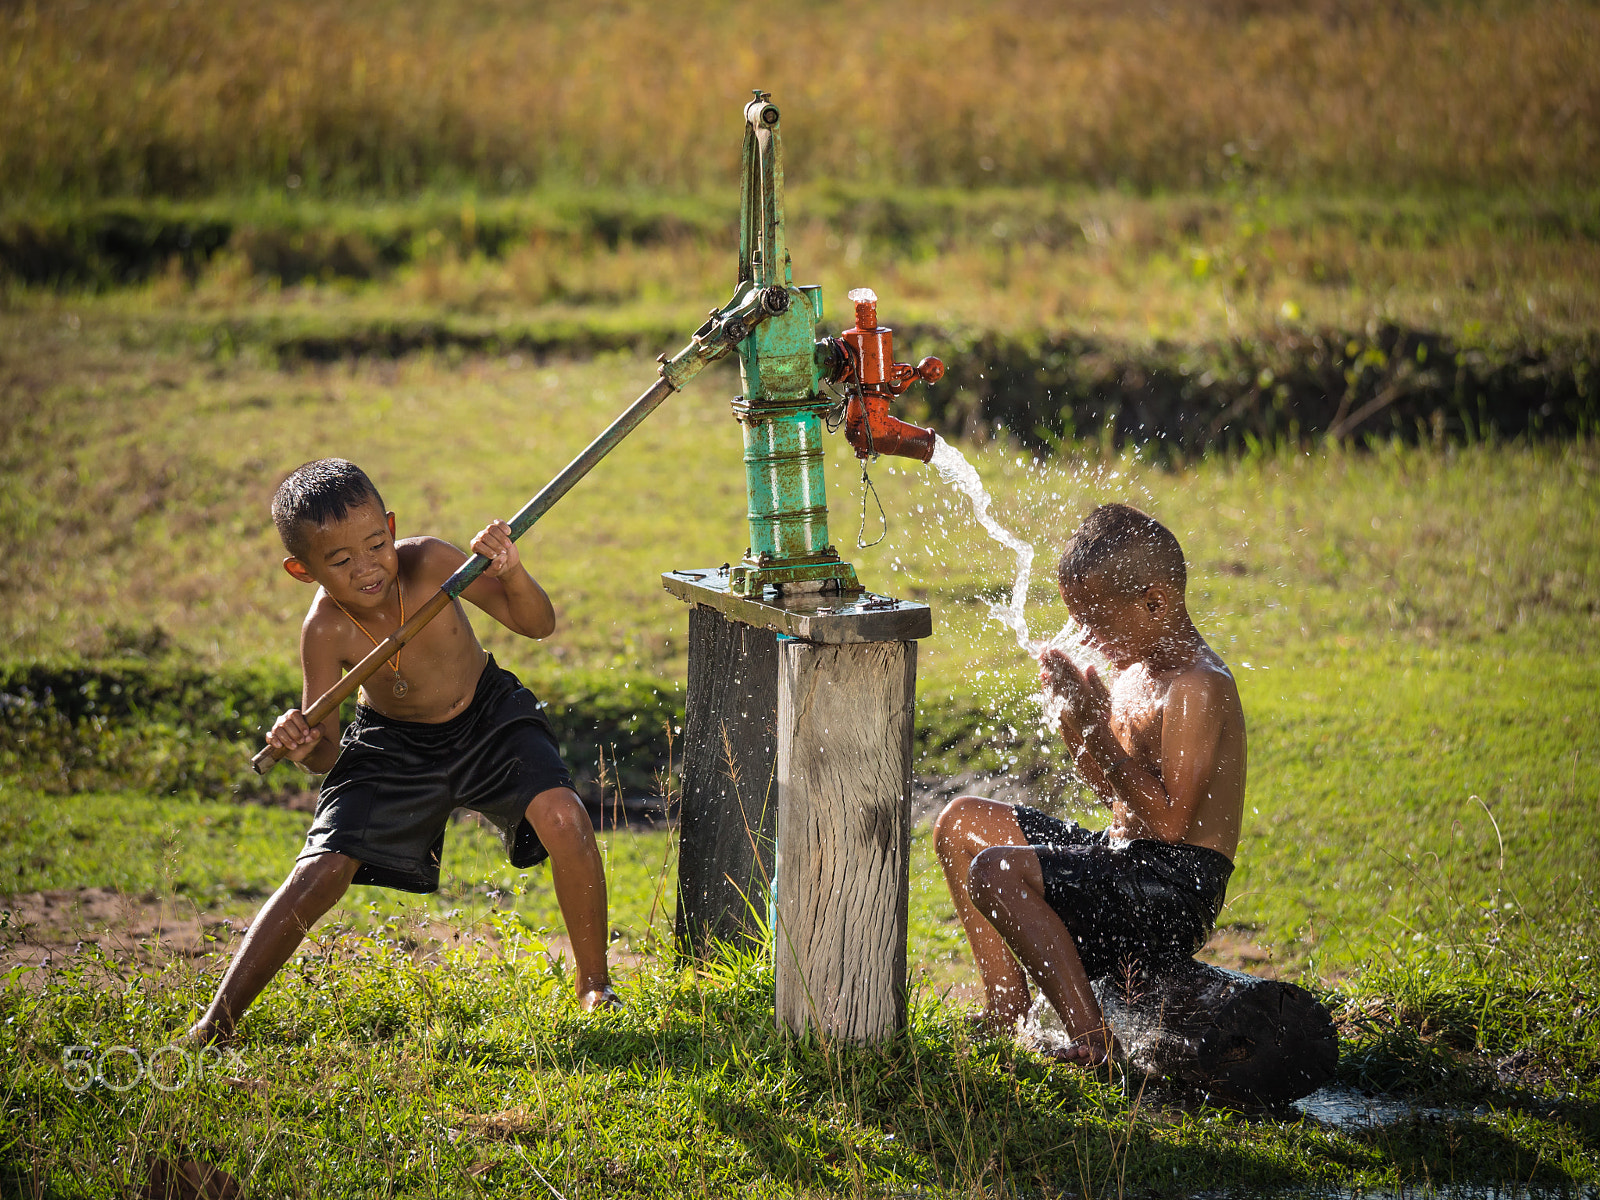 Panasonic Lumix DMC-GH4 + Panasonic Lumix G Vario 100-300mm F4-5.6 OIS sample photo. Two young boy rocking groundwater bathe in the hot days, country photography